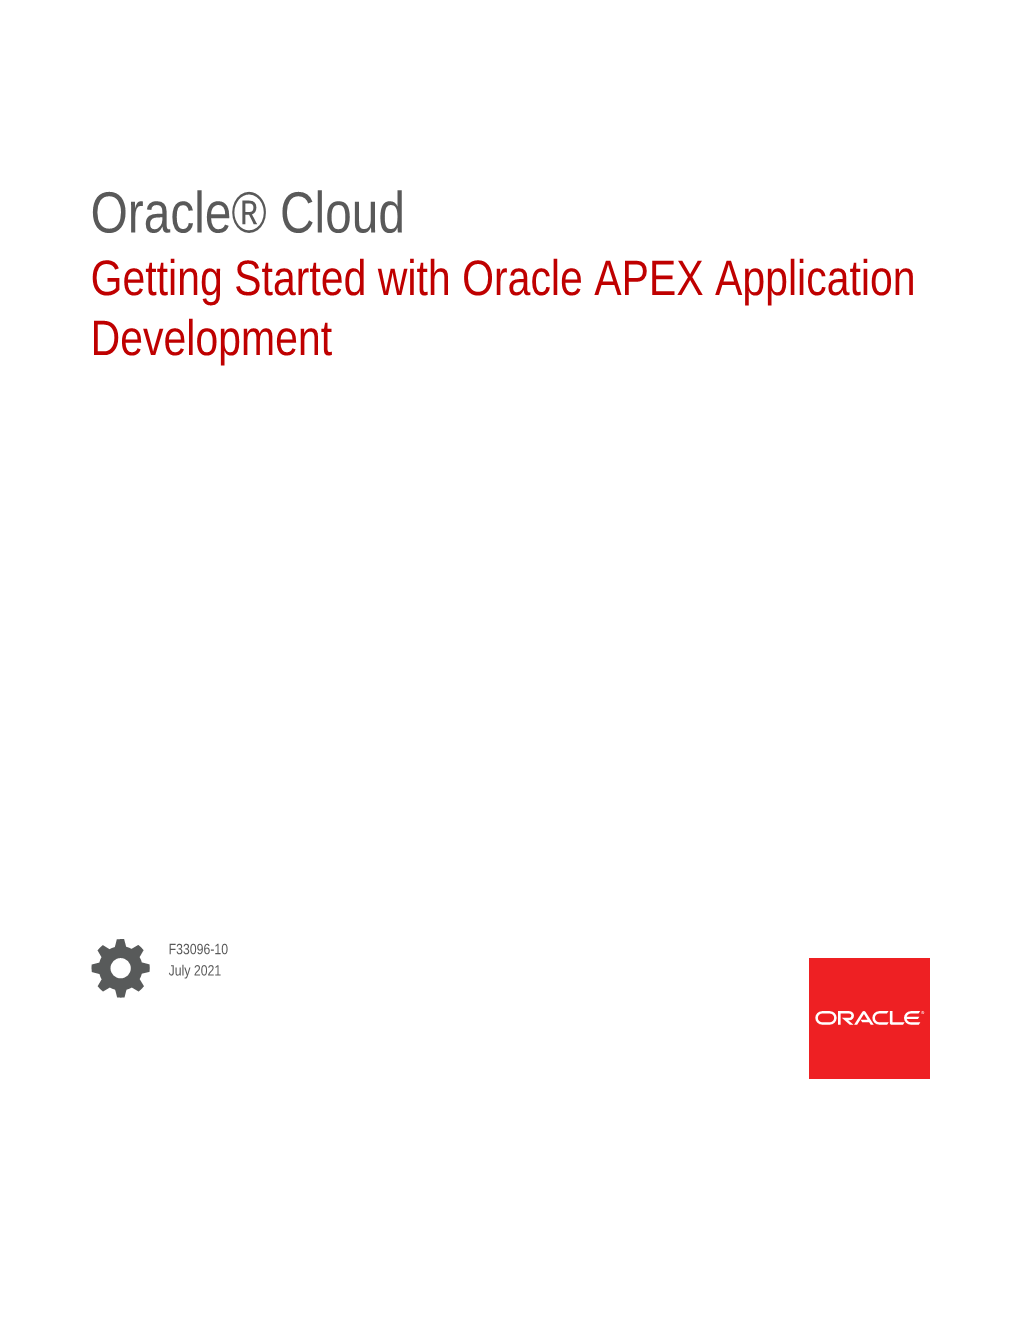 Getting Started with Oracle APEX Application Development